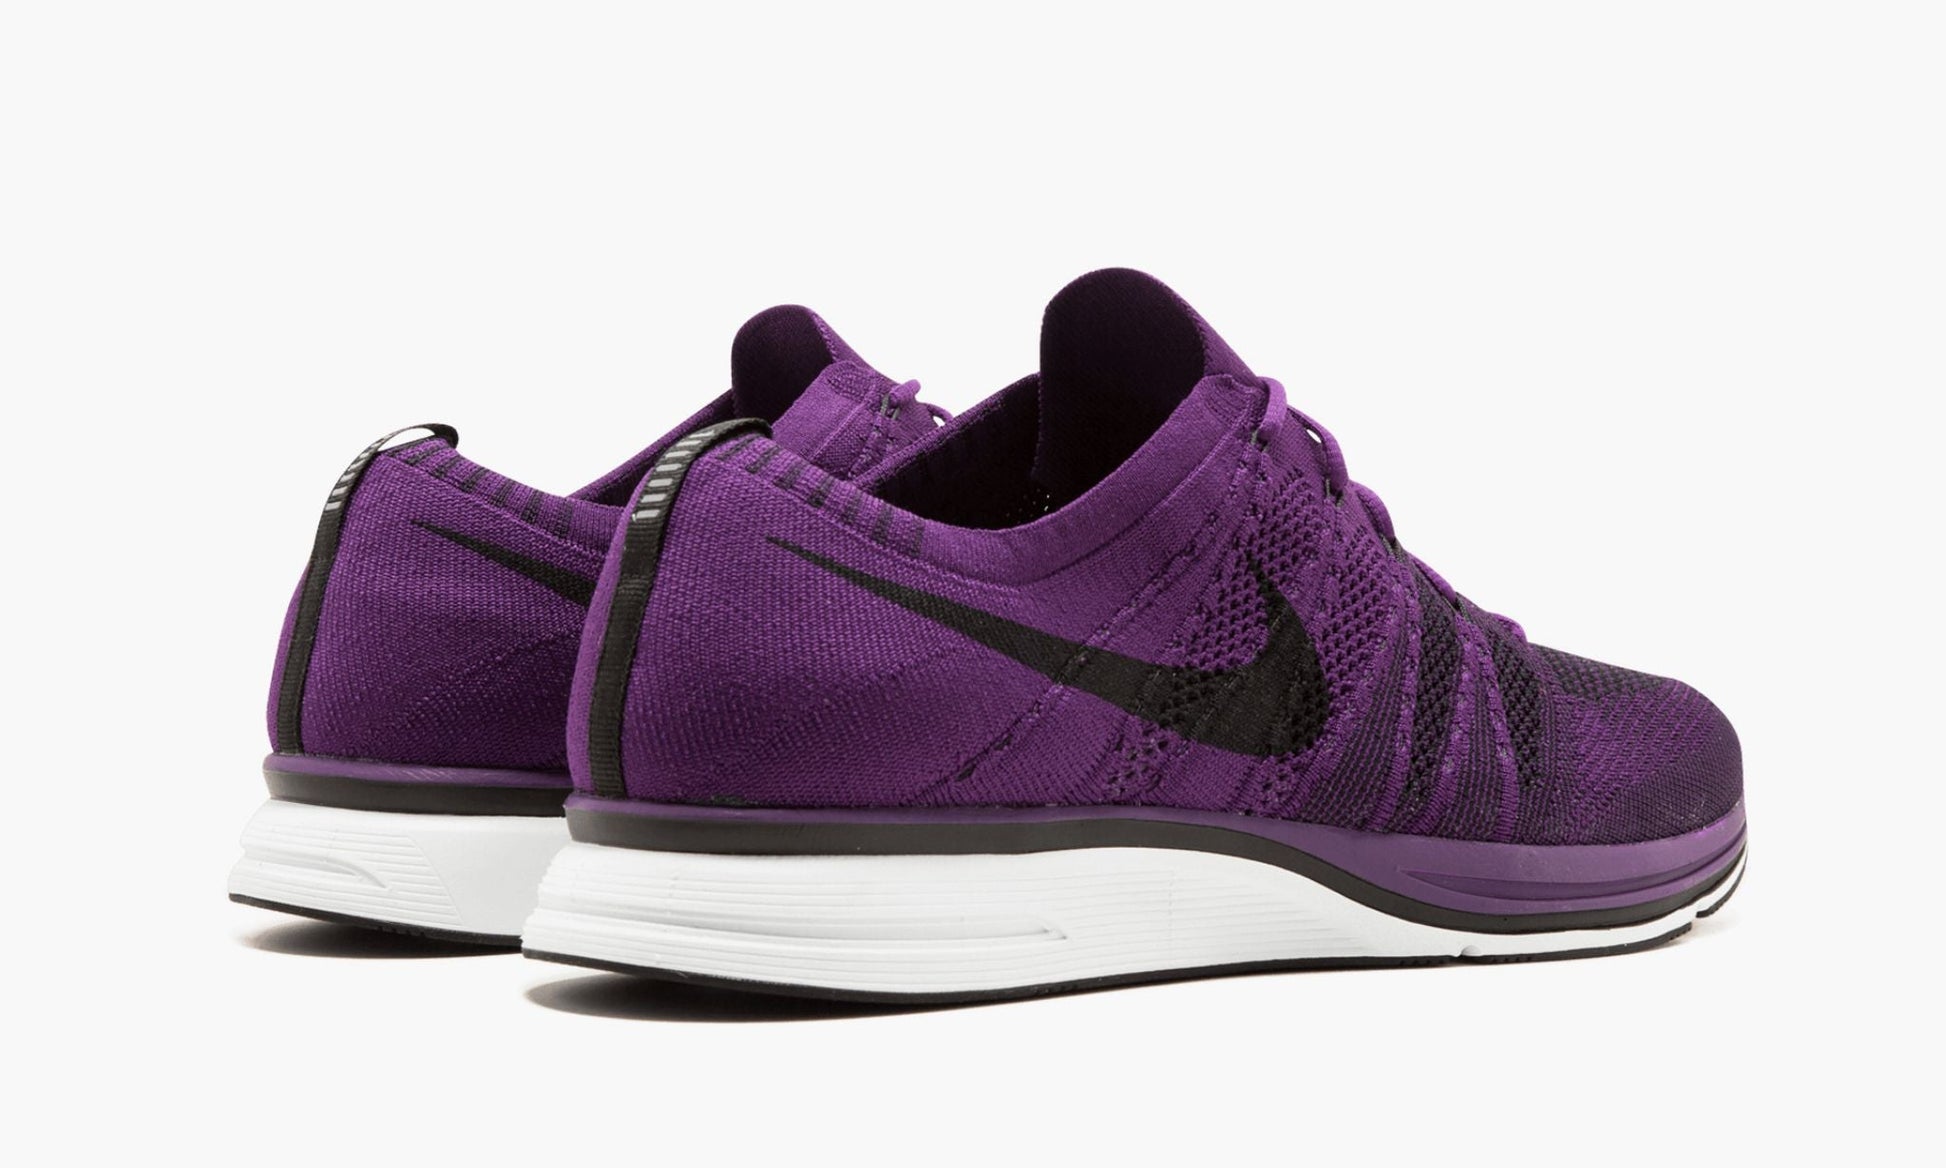 Flyknit Trainer Night - AH8396 500 - Archive